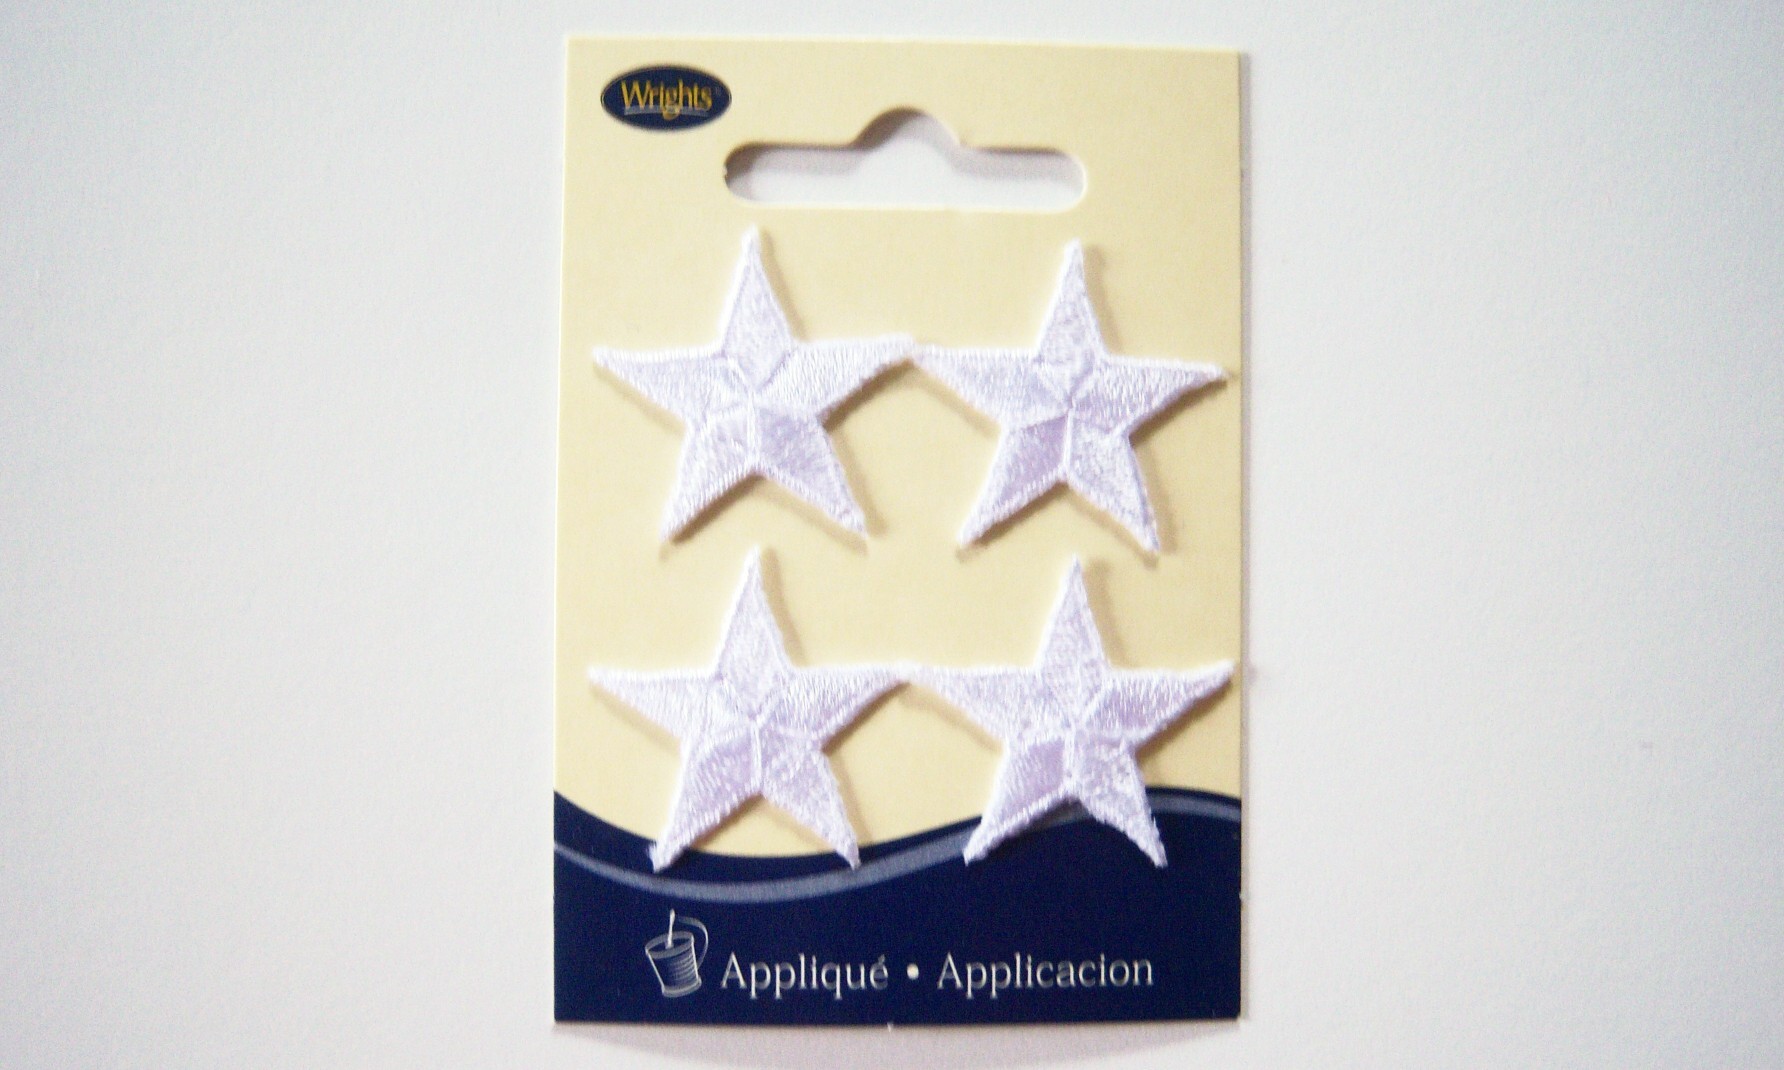 Wrights Four White Star Appliques